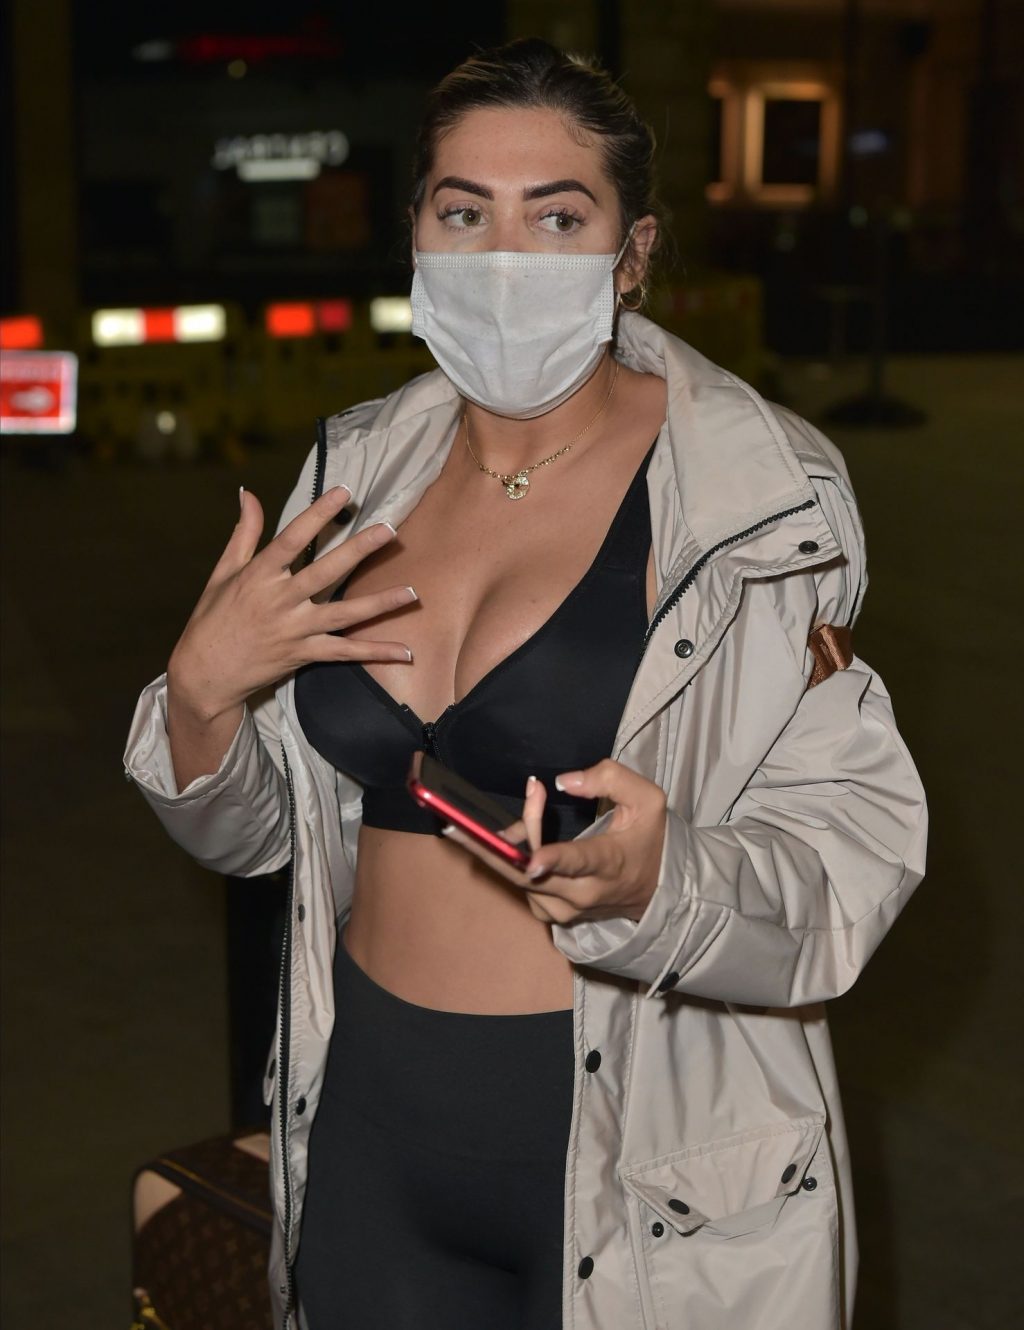 Chloe Ferry is Pictured Arriving Back in the UK after Breast Reduction Surgery (42 Photos)